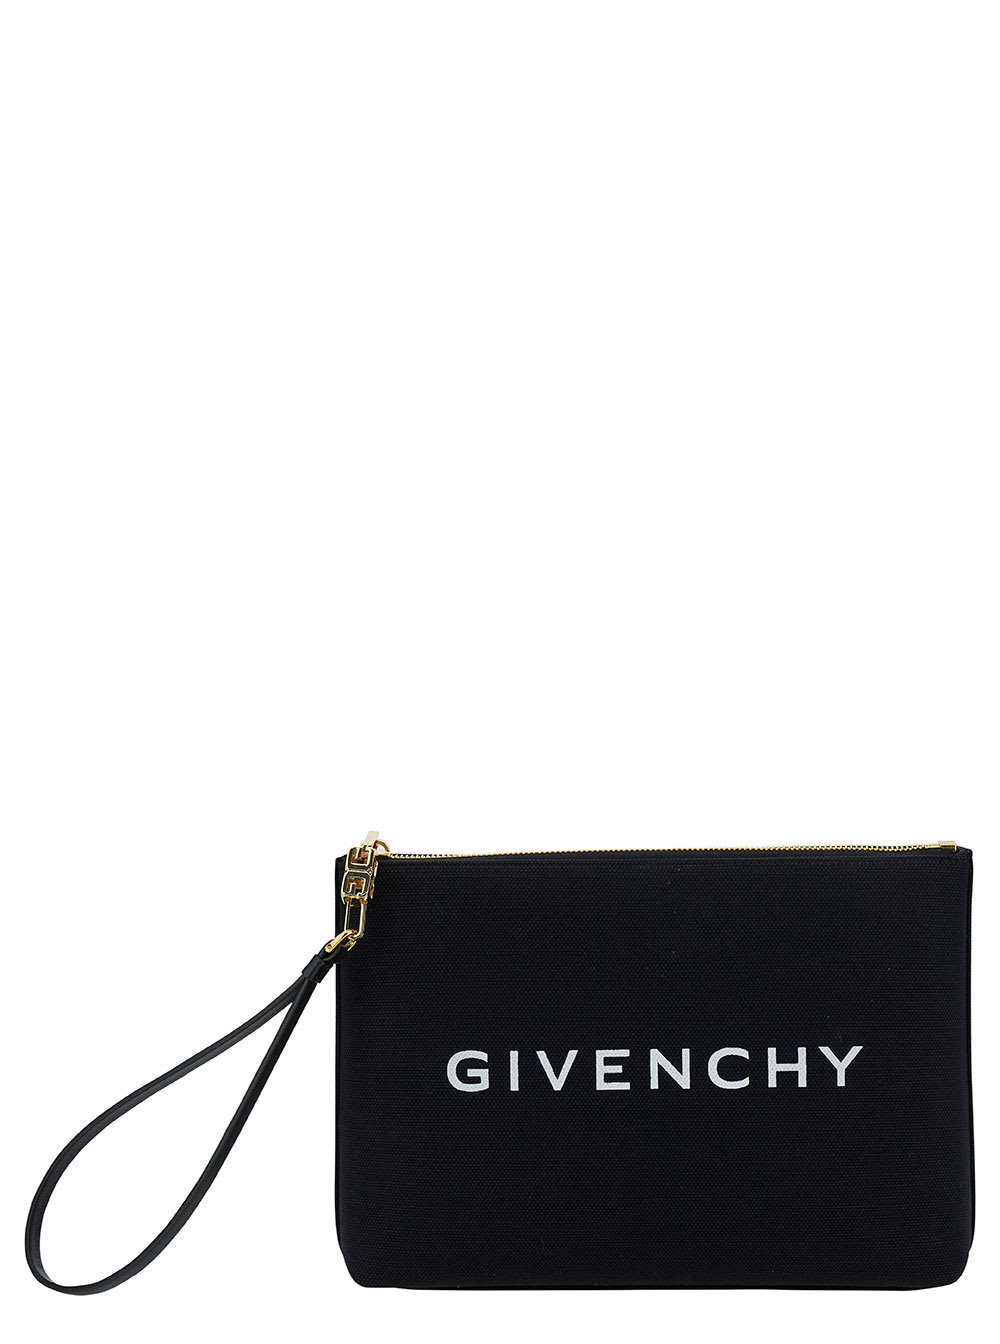 Givenchy Logo Zipped Pouch In Black